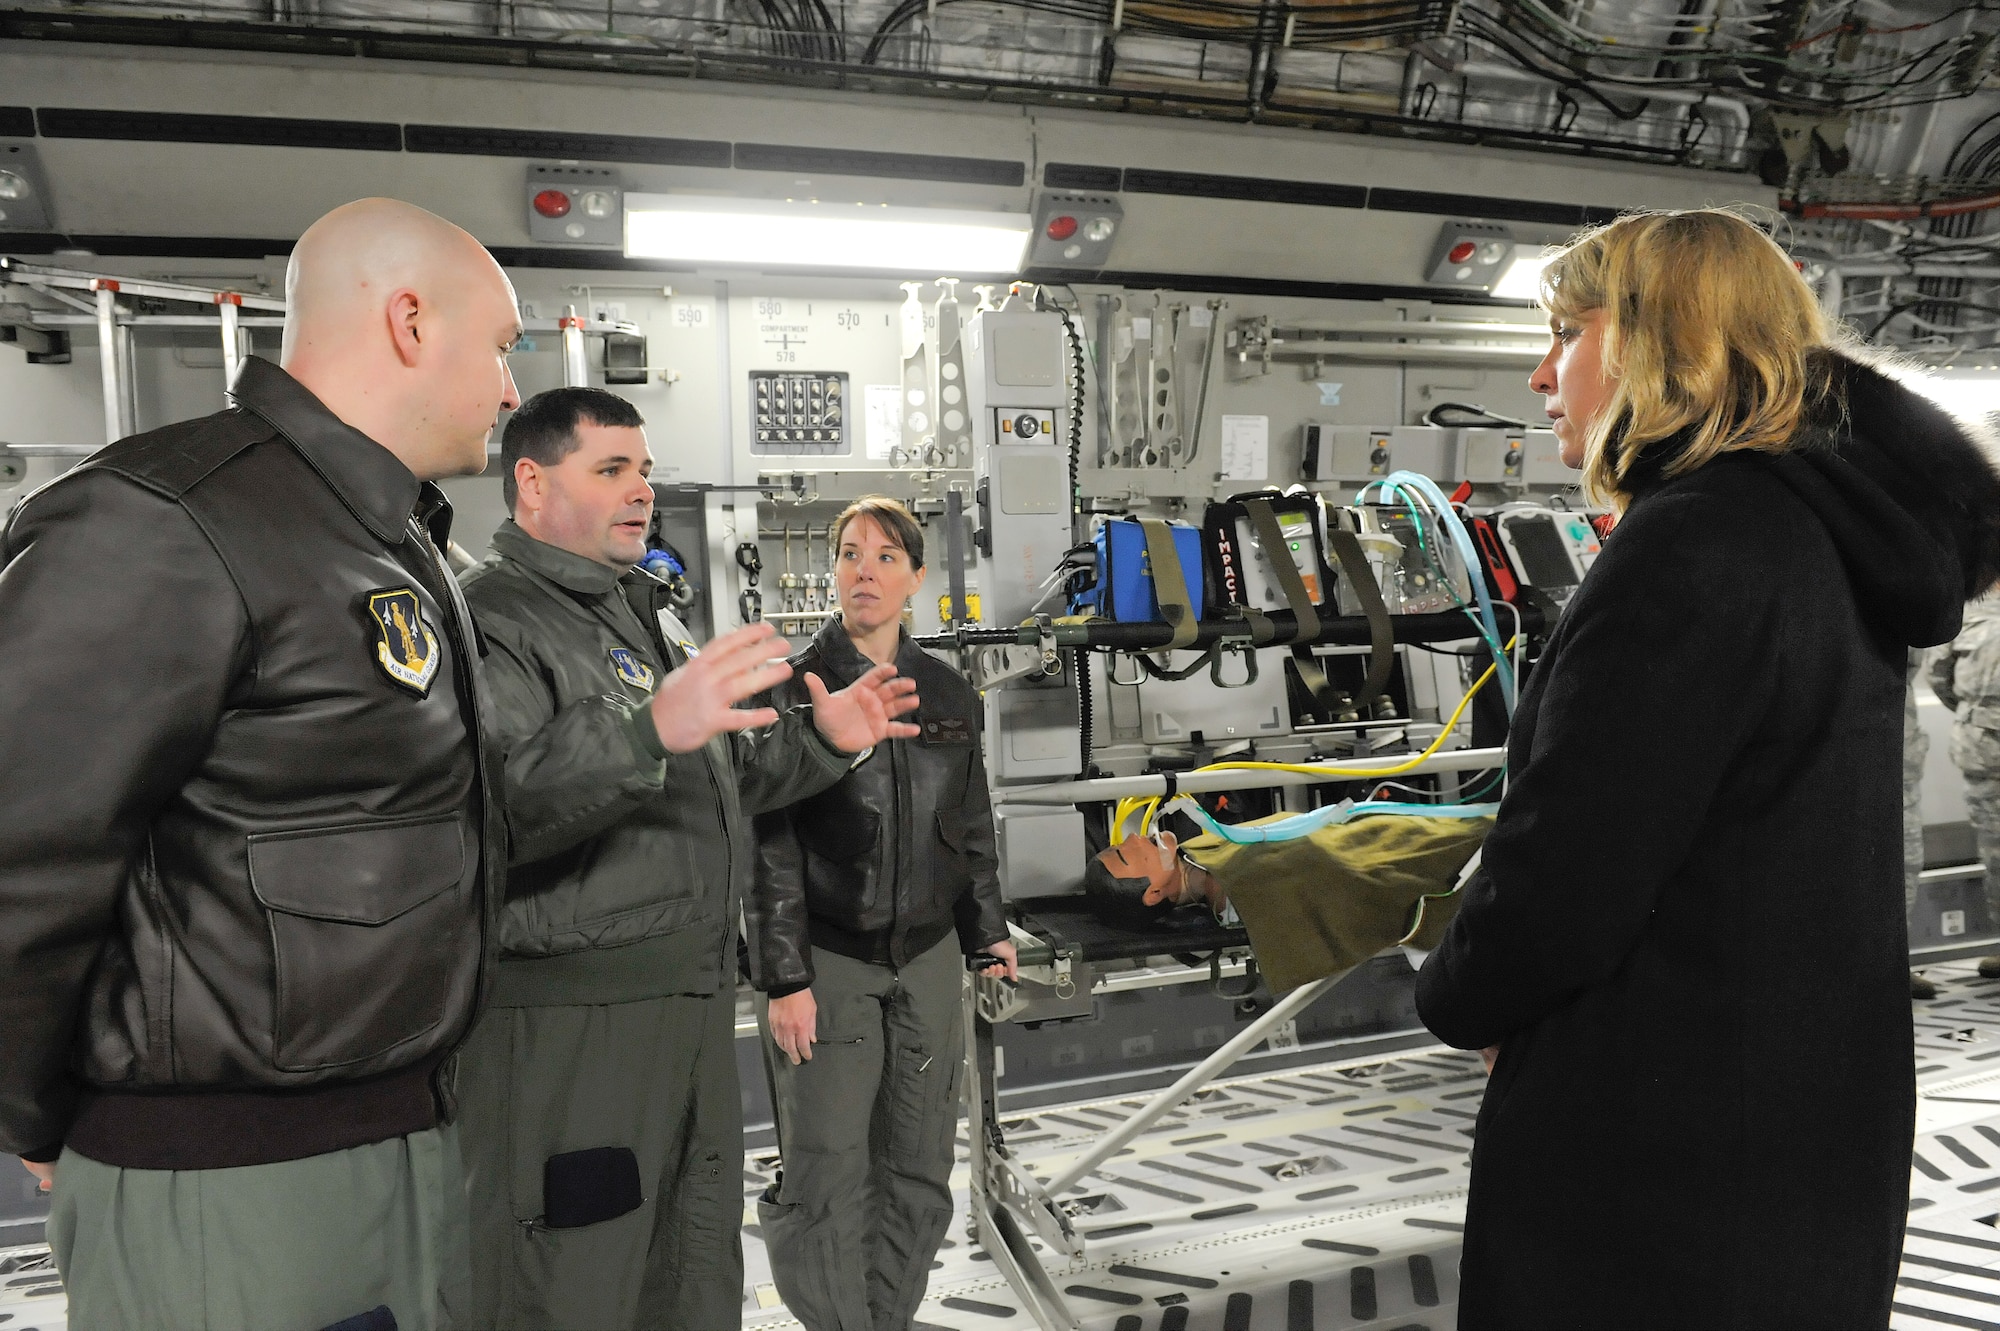 Staff Sgt. Michael McBride, flight instructor, 142nd Aeromedical Evacuation Squadron, 166th Airlift Wing, Delaware Air National Guard (middle left) briefs Secretary of the Air Force Deborah Lee James on the aeromedical evacuation mission inside a C-17A Globemaster III of the 436th Airlift Wing, Jan. 10, 2014, at Dover Air Force Base, Del. As part of the Air Force's total force concept, members of the 142 AES are tasked to provide patient care during transport to advanced care centers. (U.S. Air Force photo/Roland Balik)